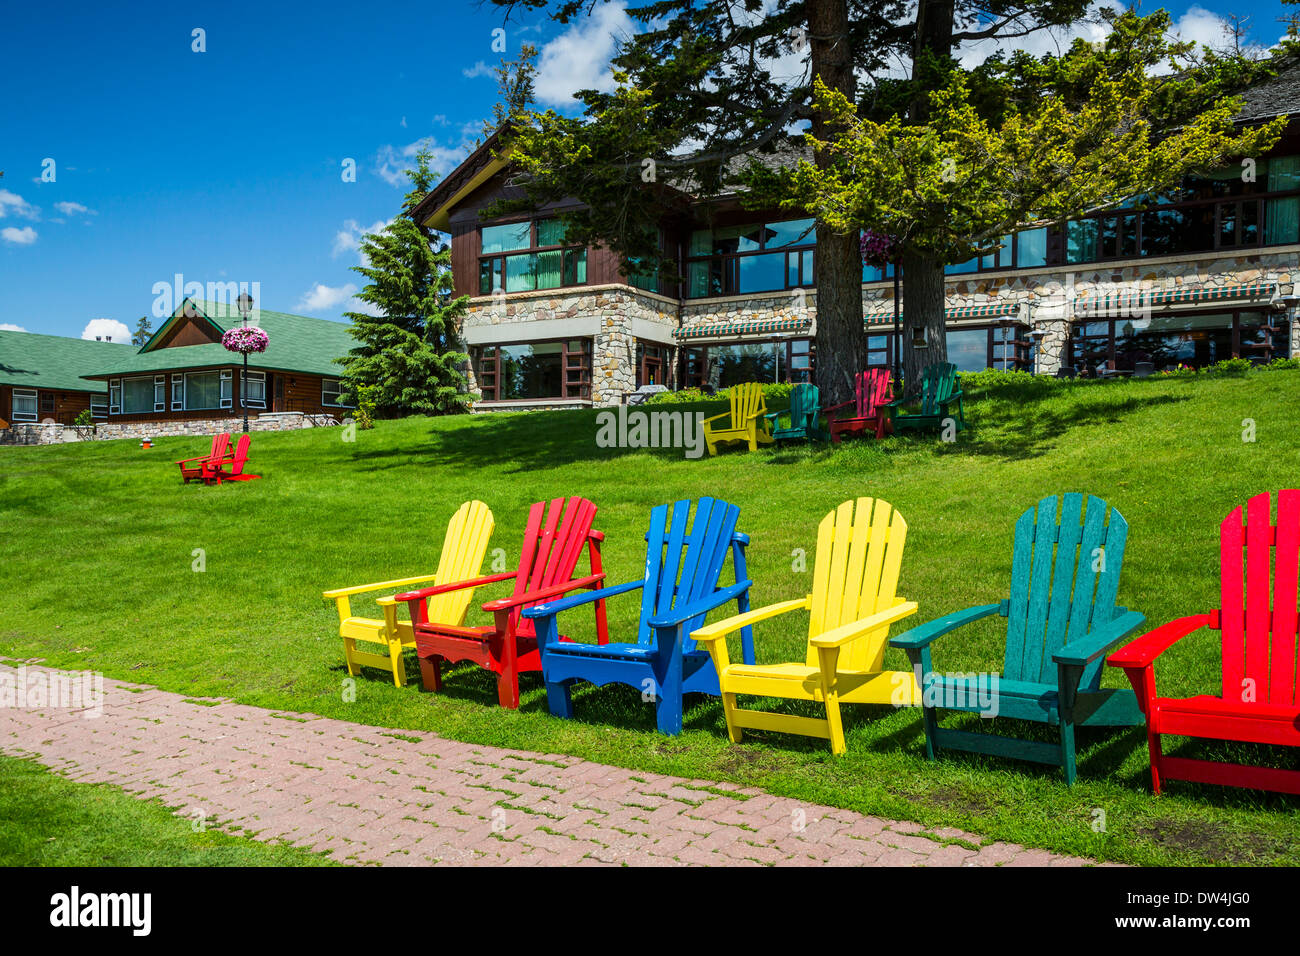 Colorful Lawn Chairs Beside The Lake At The Fairmont Jasper Park